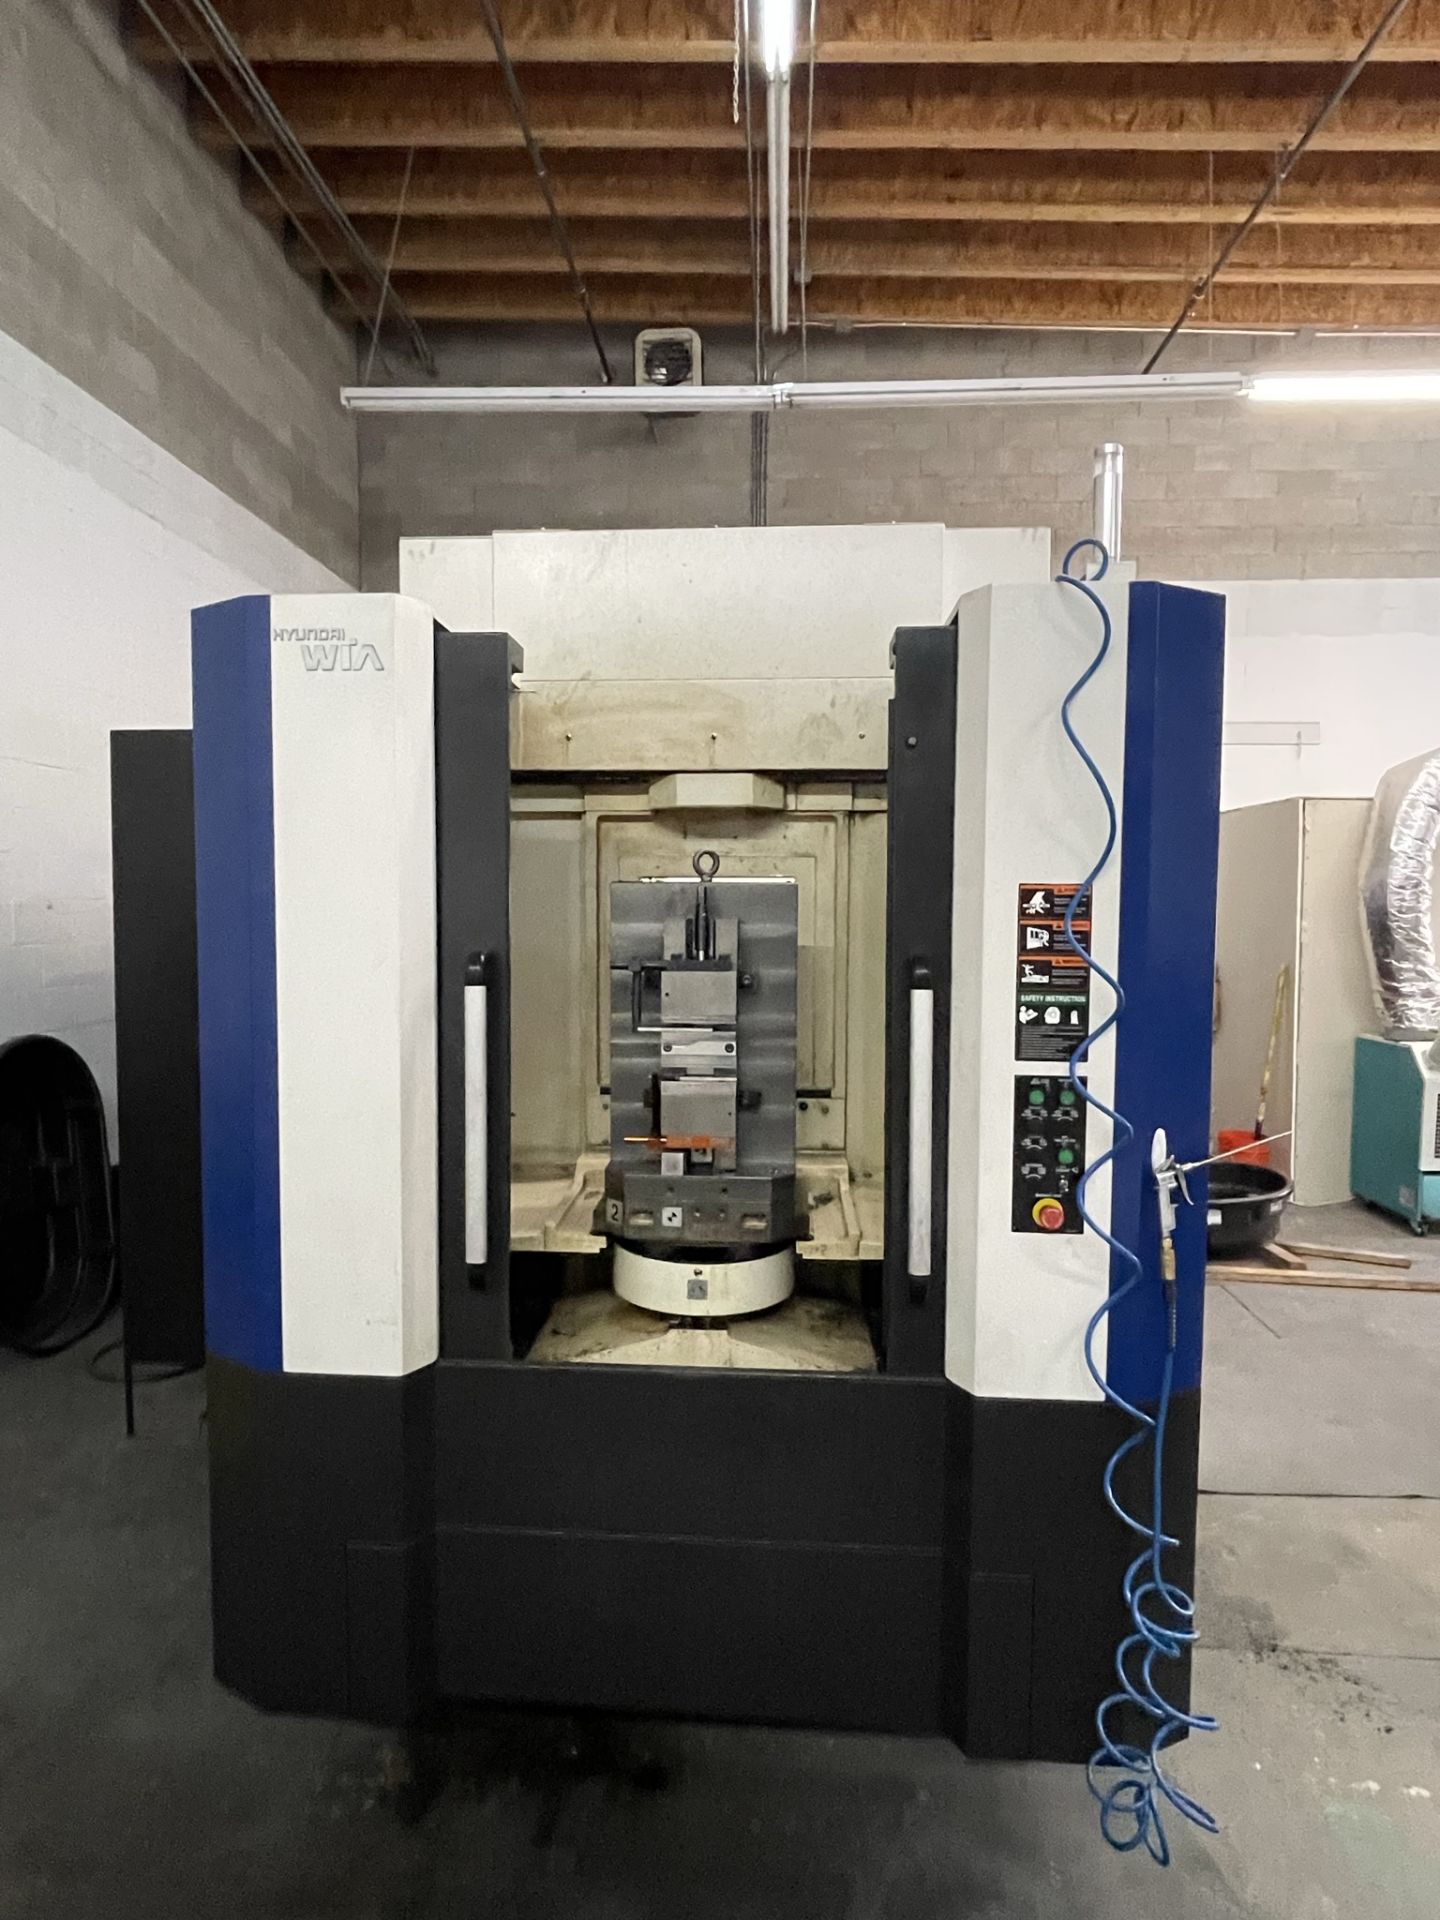 2013 Hyundai WIA HS4000i 4-Axis Horizontal Machining Center with Pallet Changer *1643 Cutting Hours* - Image 8 of 25